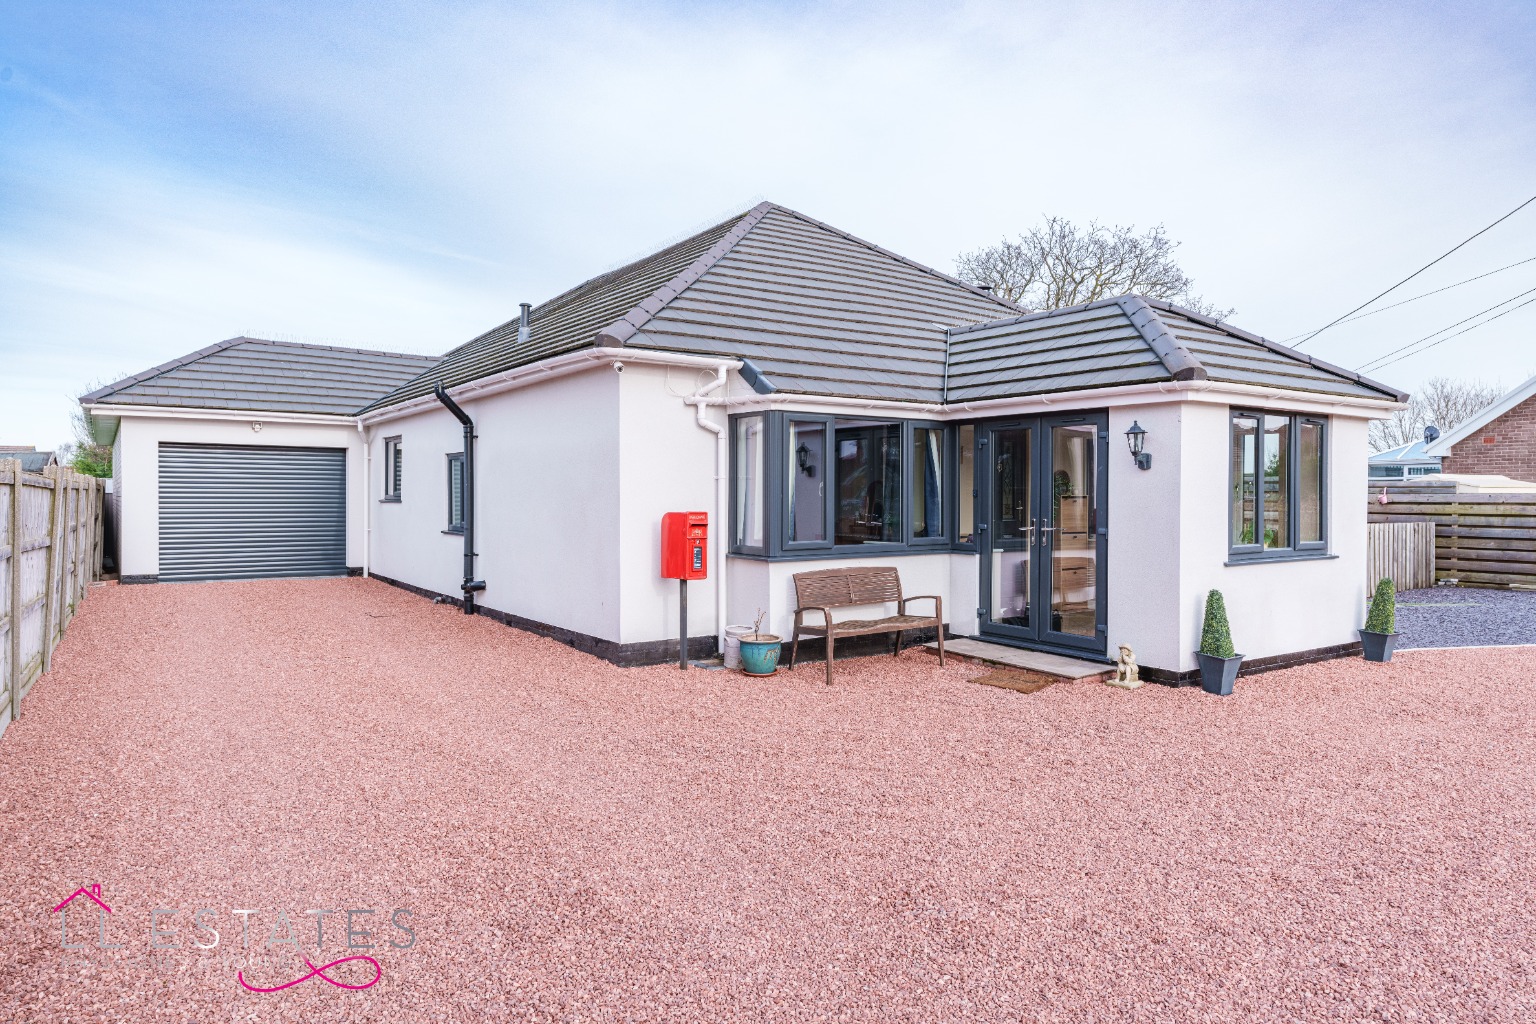 2 bed detached bungalow for sale, Conwy - Property Image 1